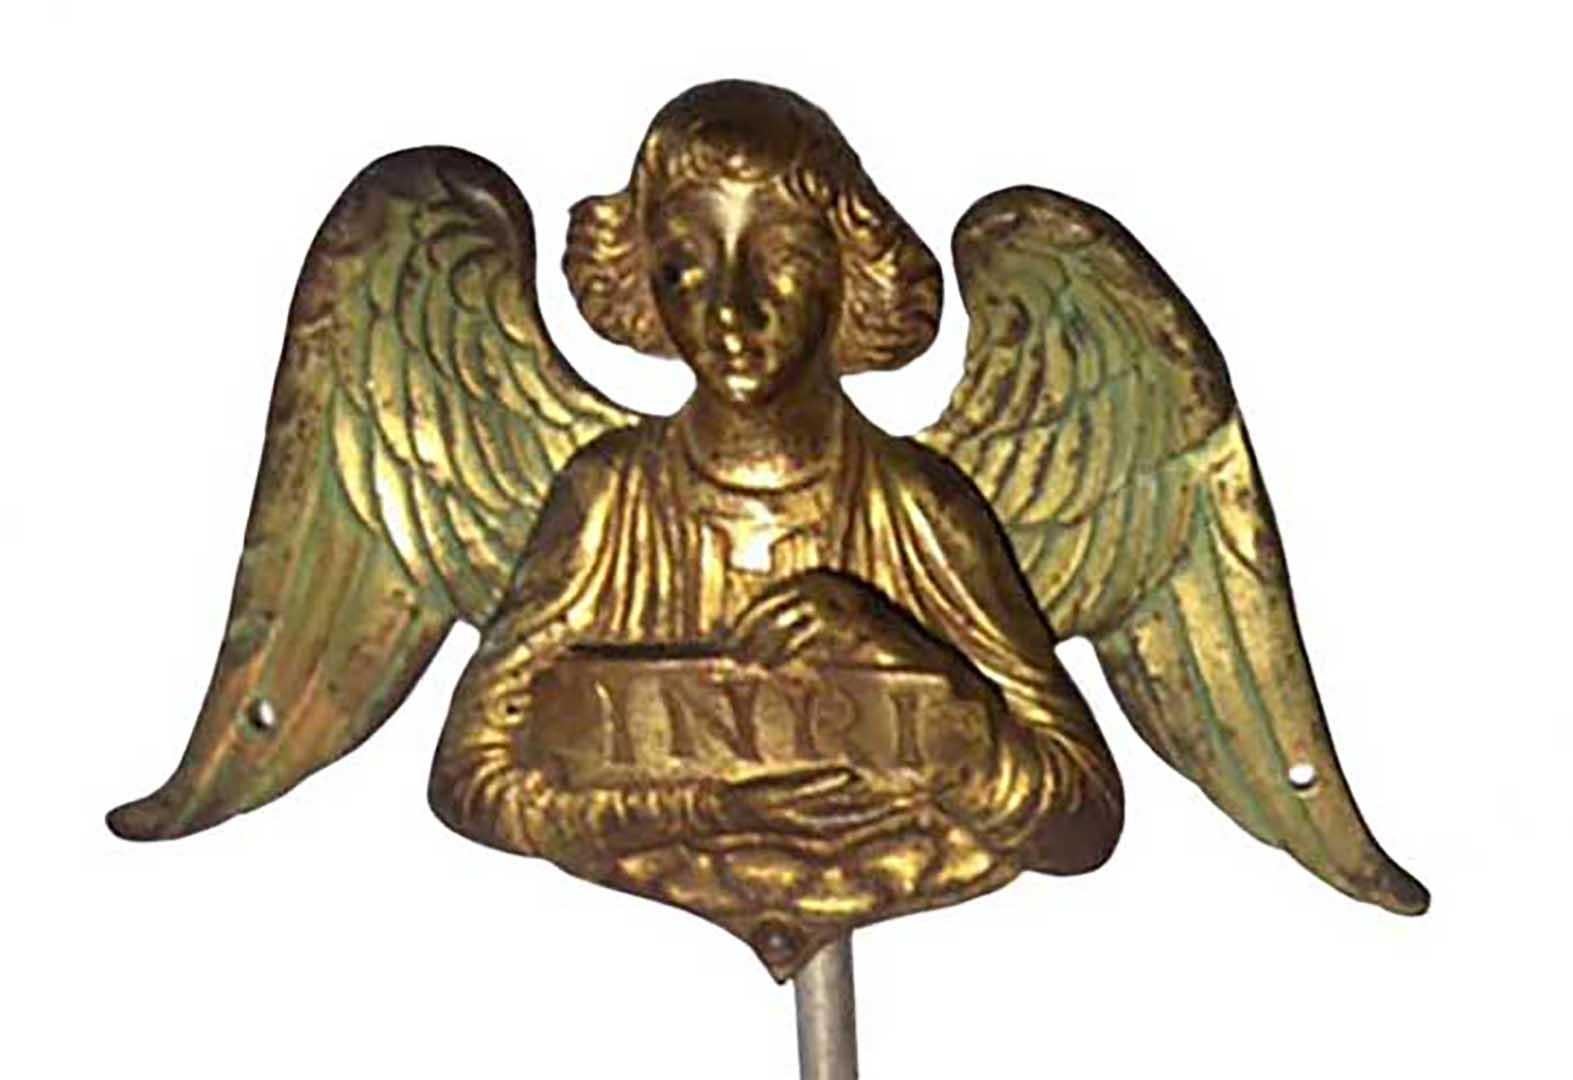 Pair of bronze doré Byzantine style angels with original green color over bronze on the wings. Mounted on lucite stands.